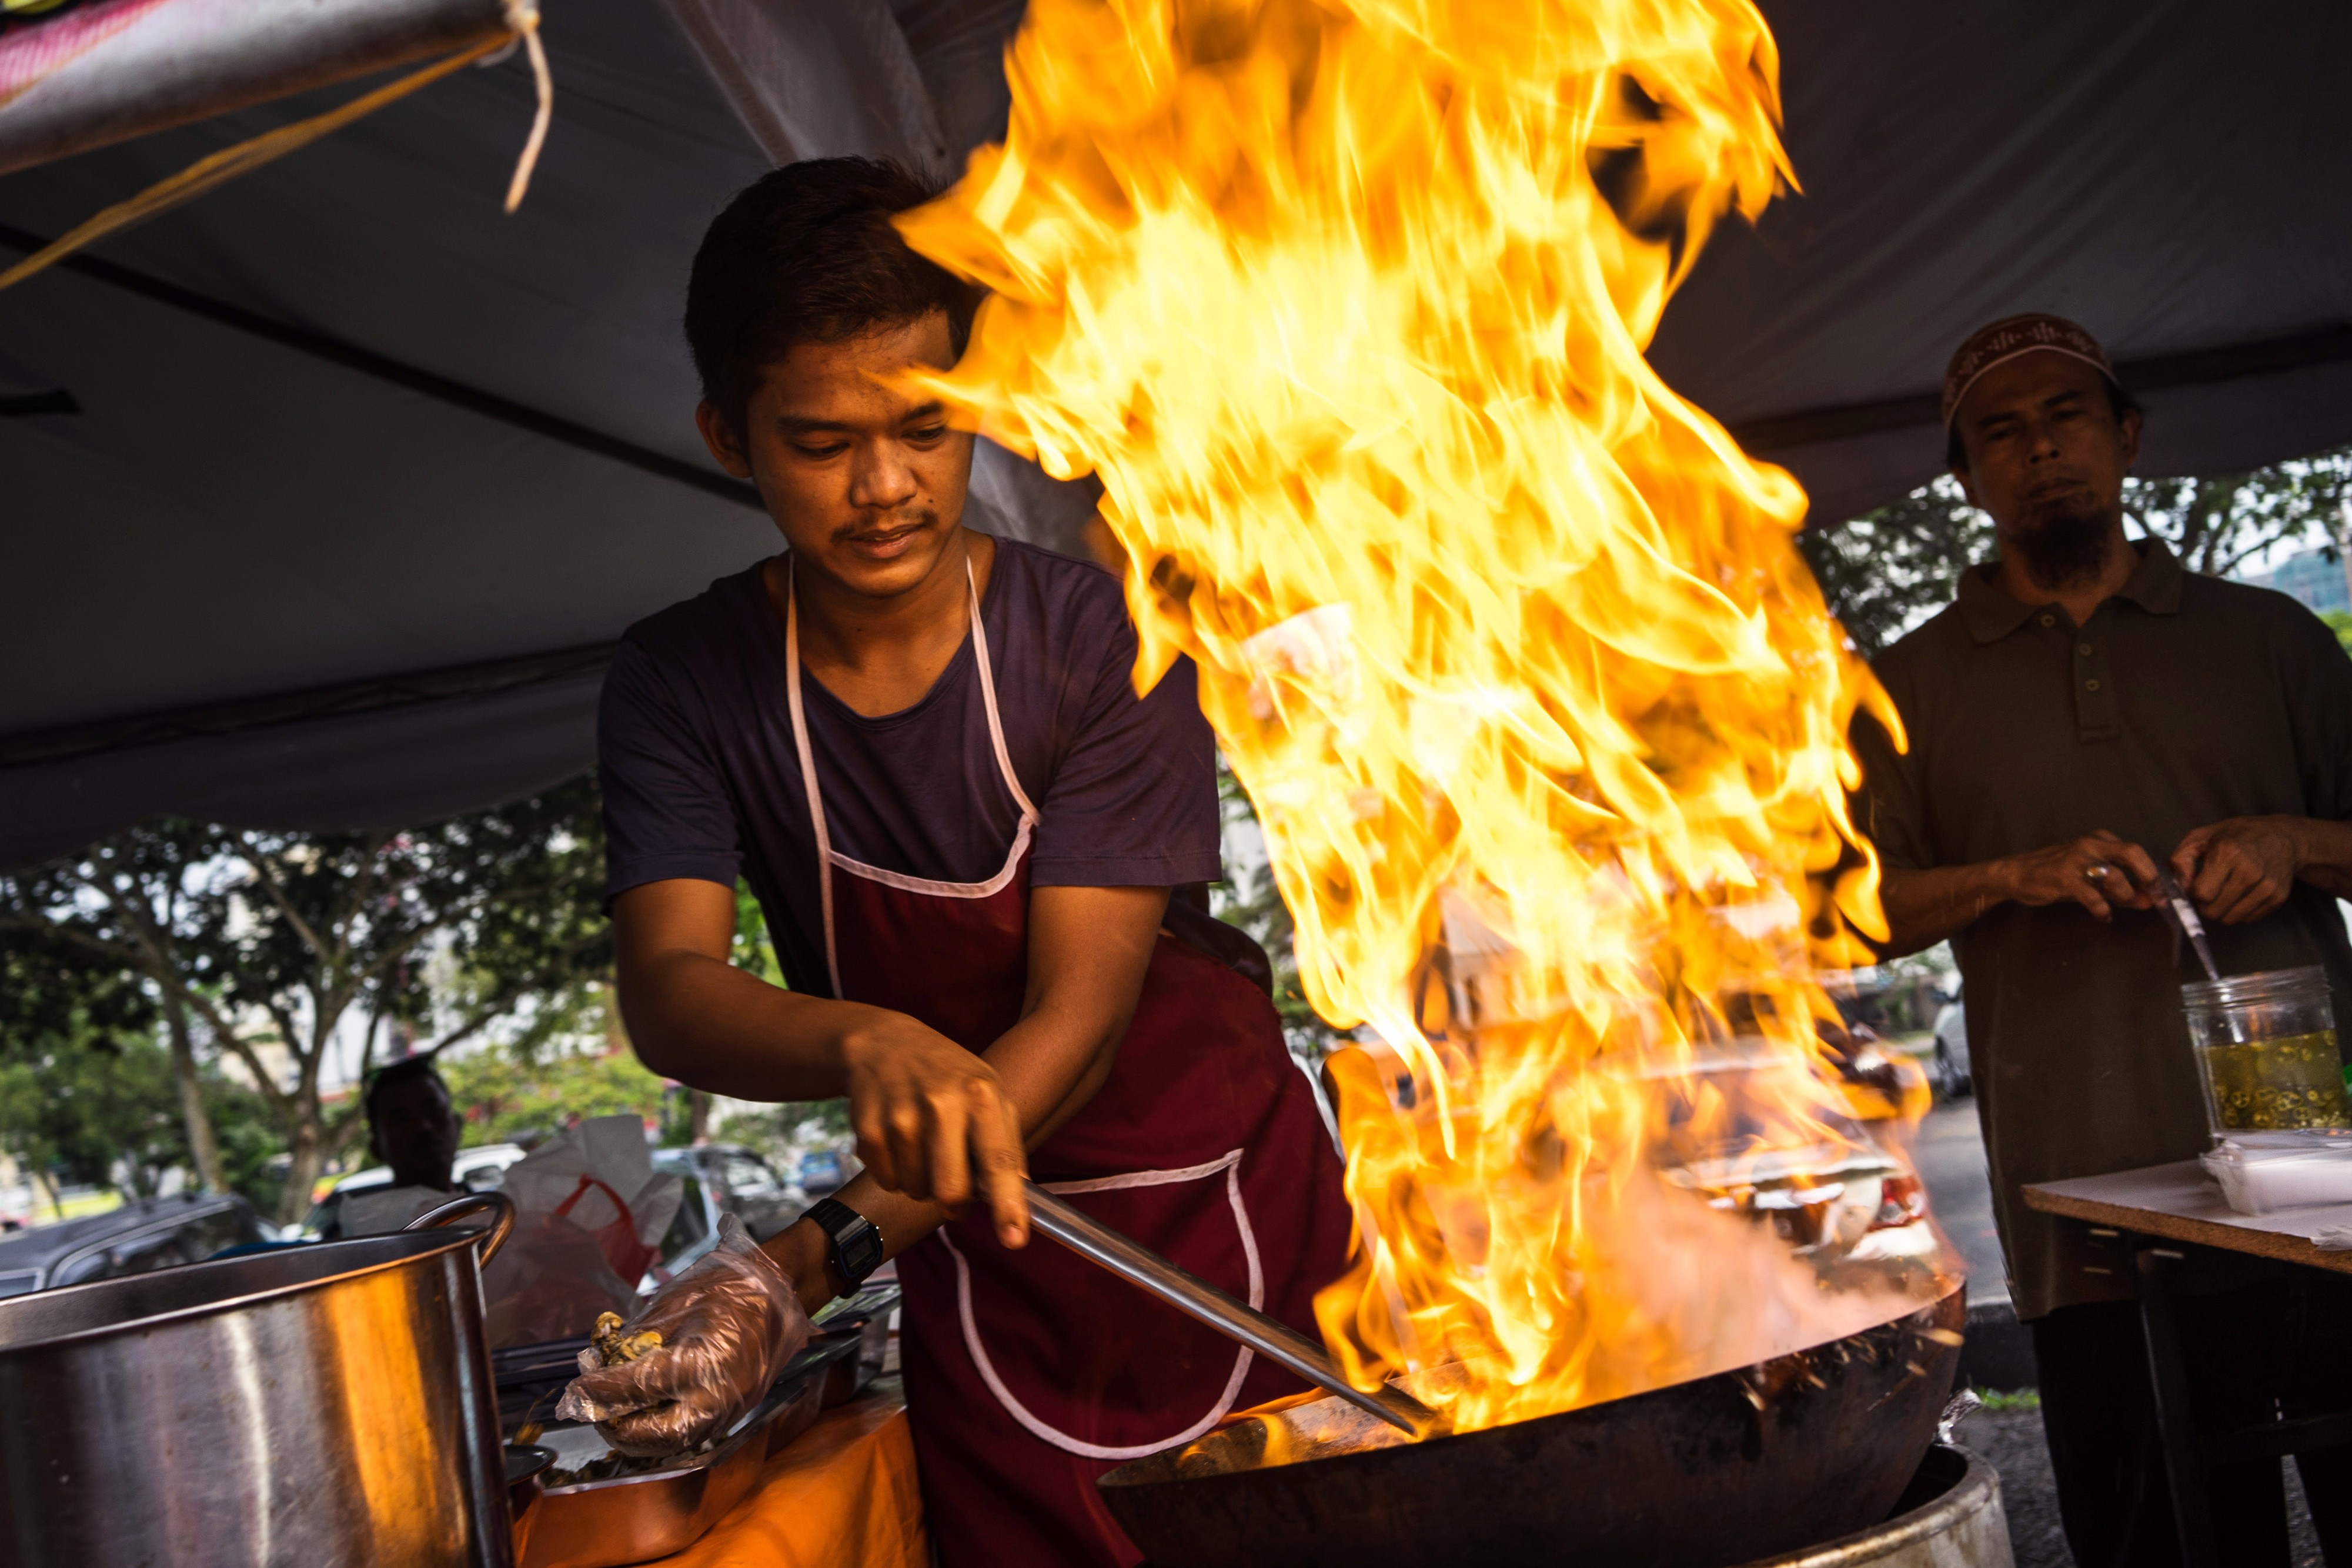 Flames rise from a wok while a chef cooks fried noodles at a food stall in a market in Johor Bahru, Johor, Malaysia on Friday, July 10, 2015. Photographer: Sanjit Das/Bloomberg